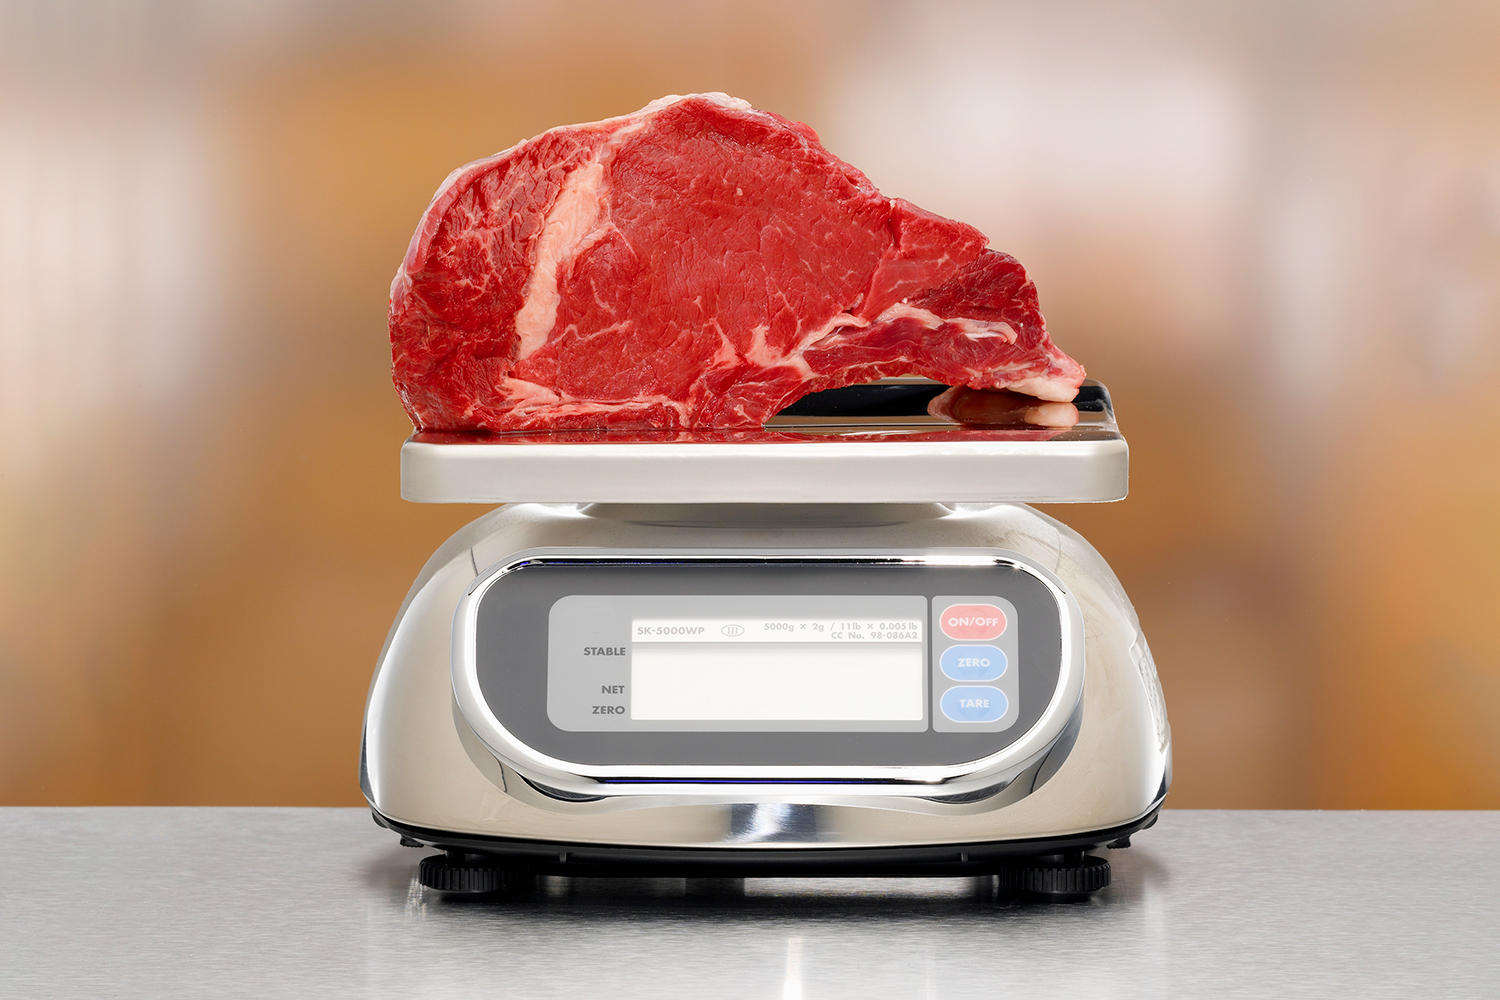 7 Best Digital Food Scales to Smarten Up Your Kitchen and Meal